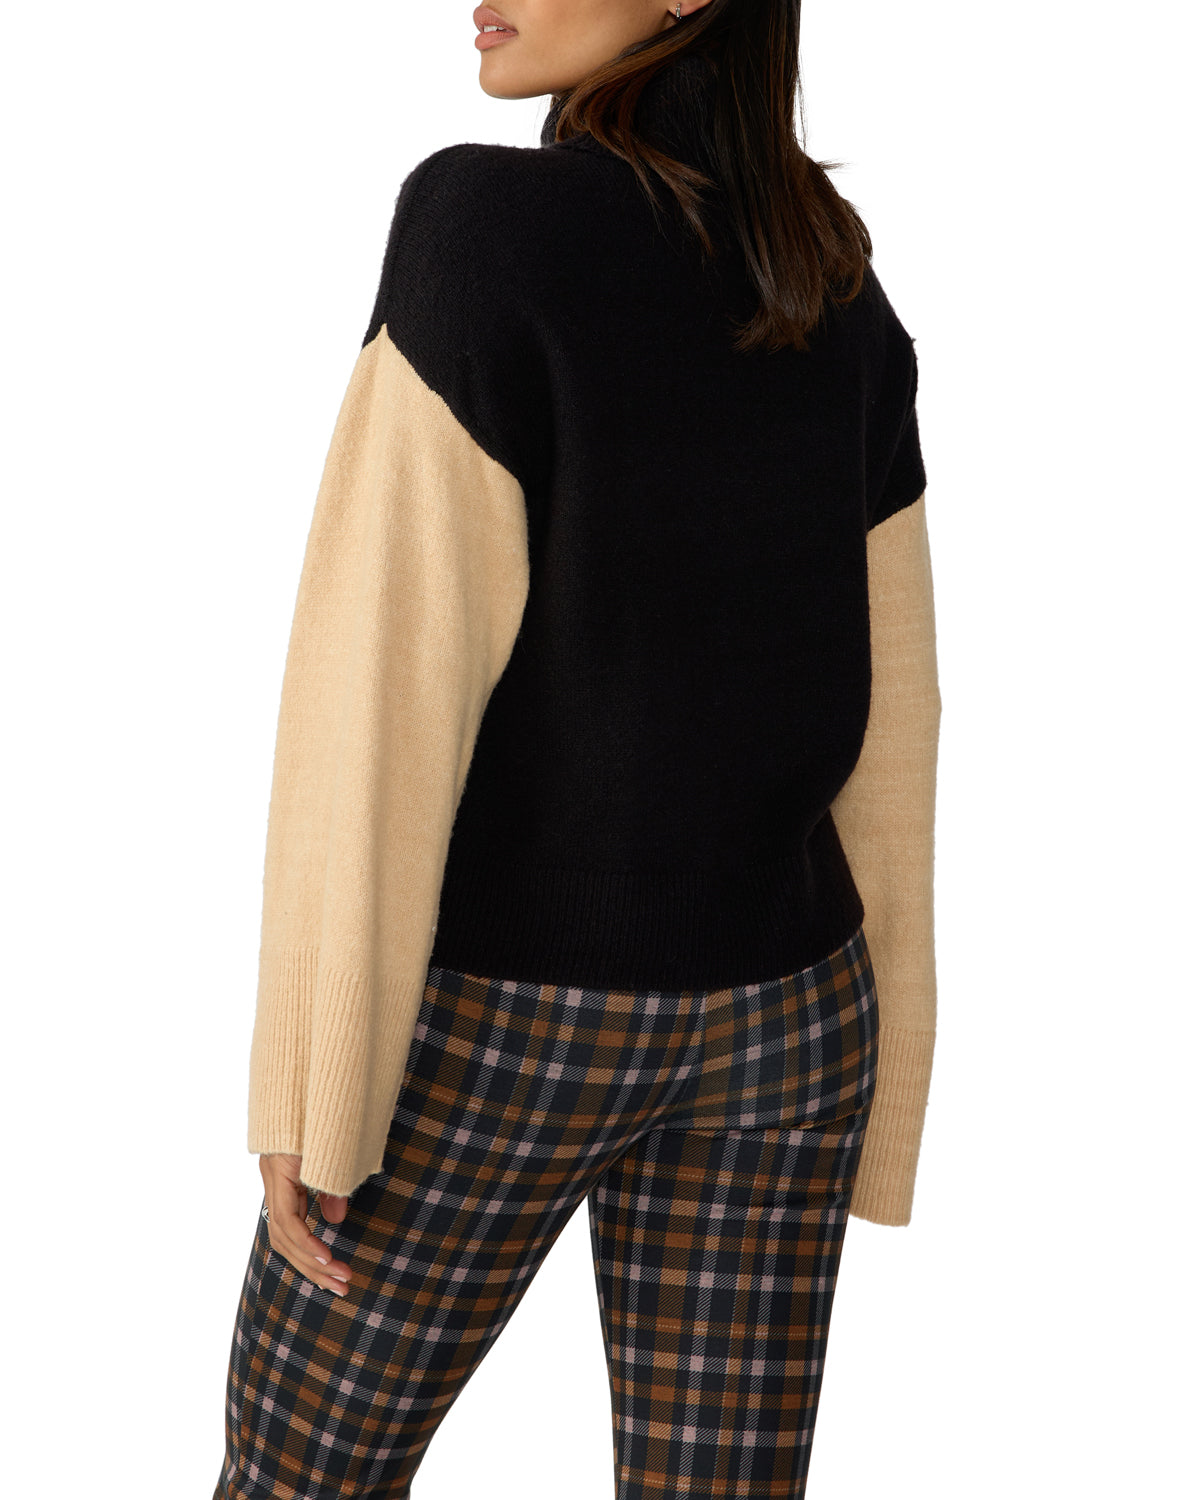 The Color Block Sweater